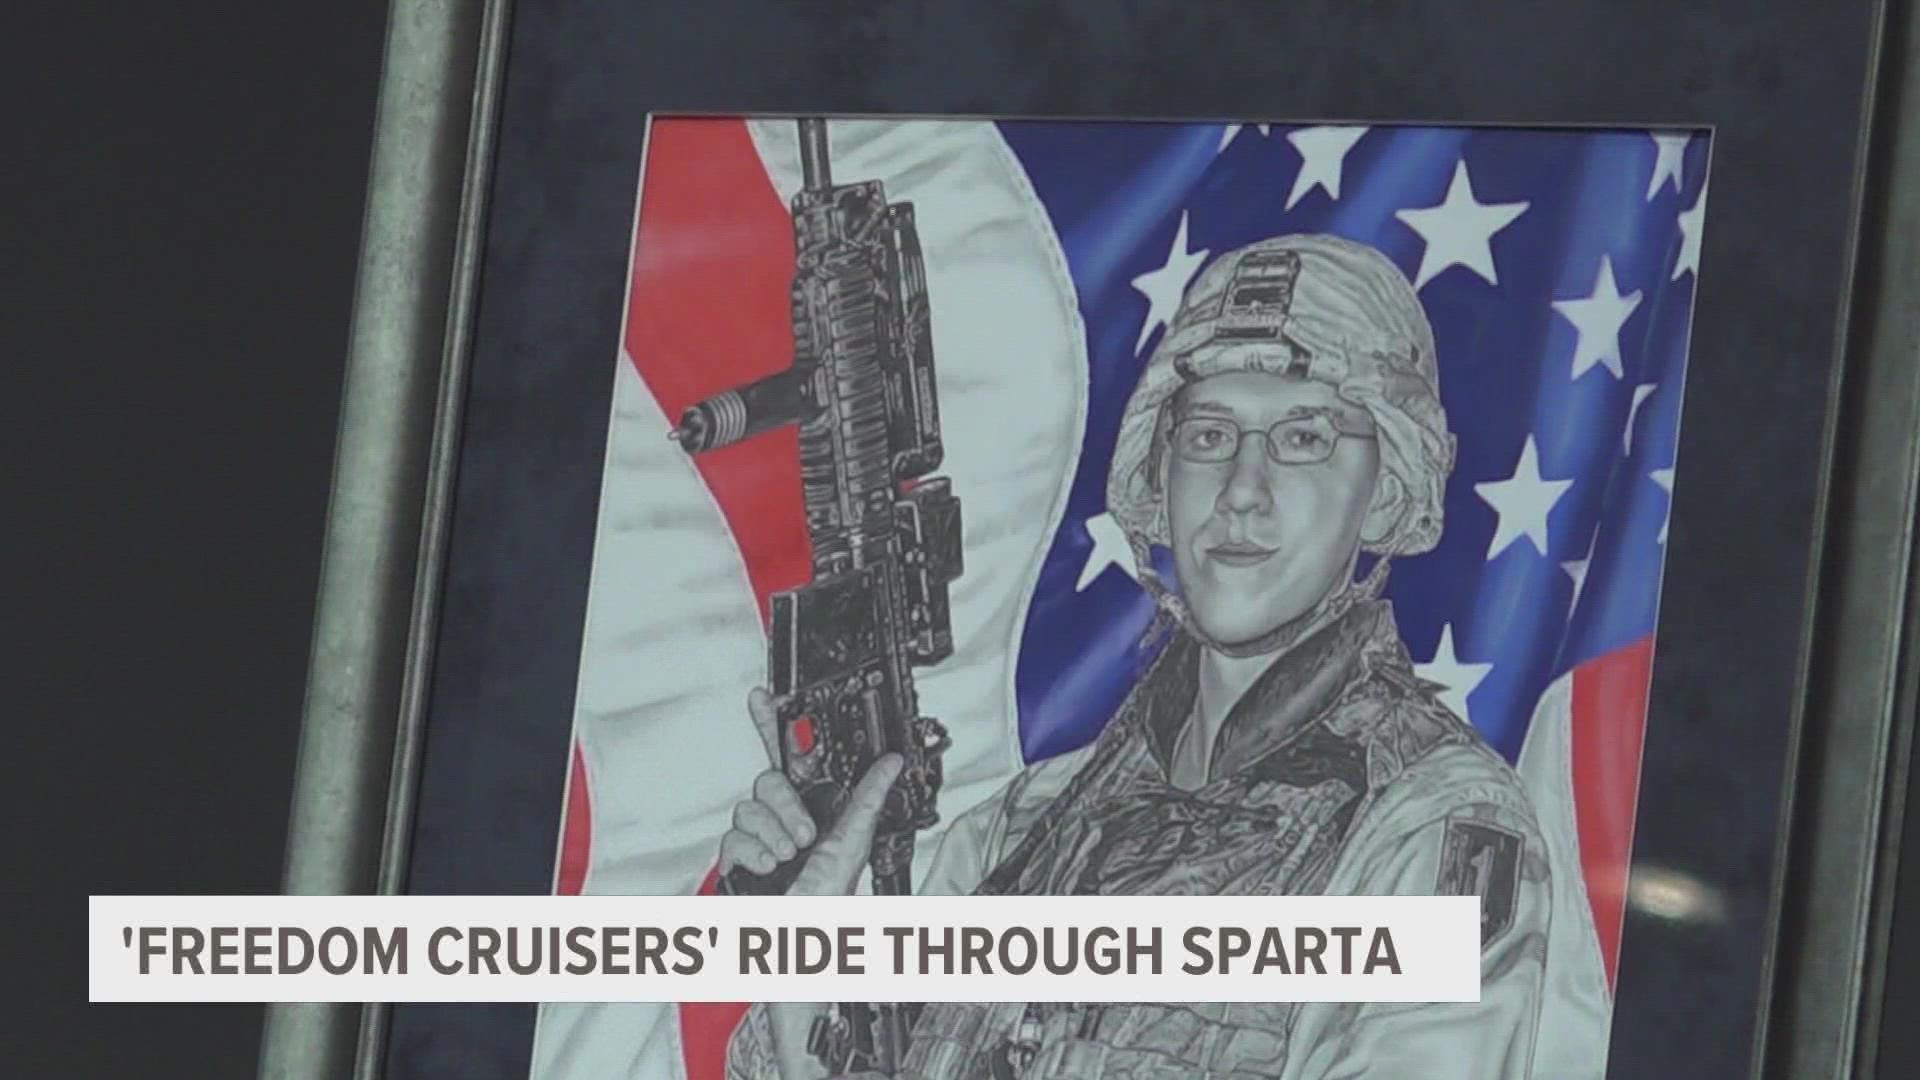 Several bikes and cars rode through Sparta today as 'Freedom Cruisers' to honor the veterans that have been lost over the years.